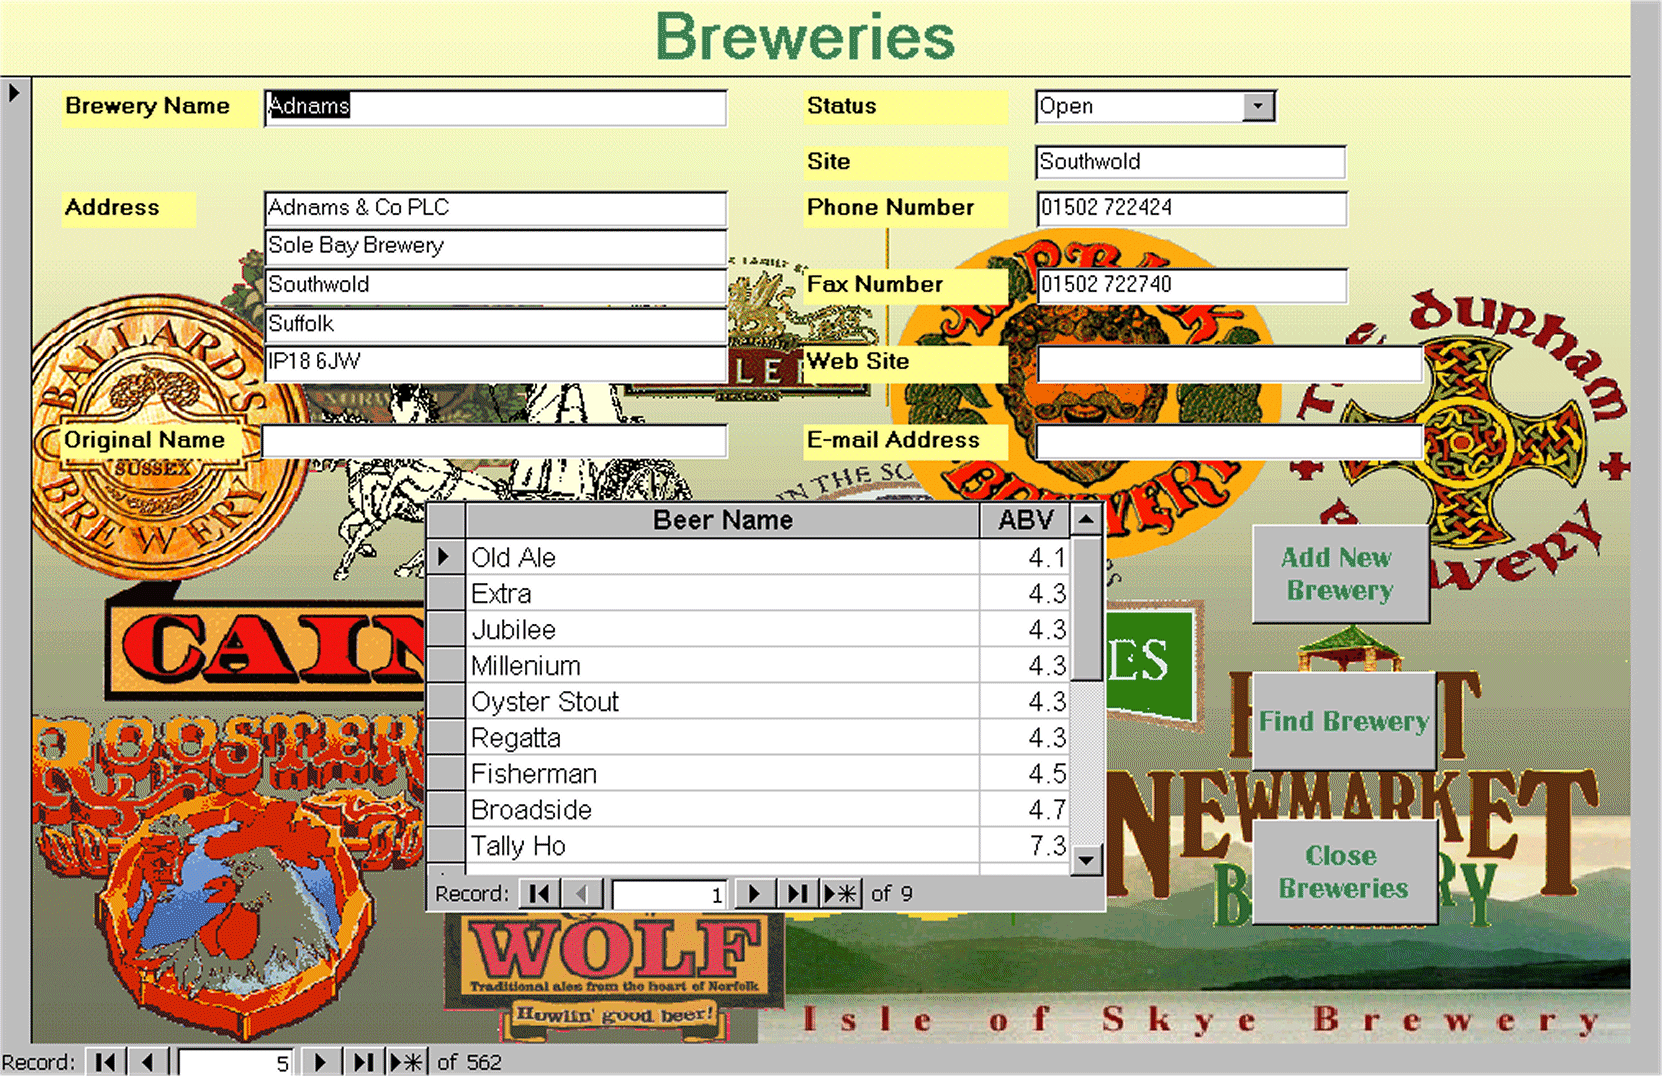 Breweries form - Lists all beers tried from a brewery